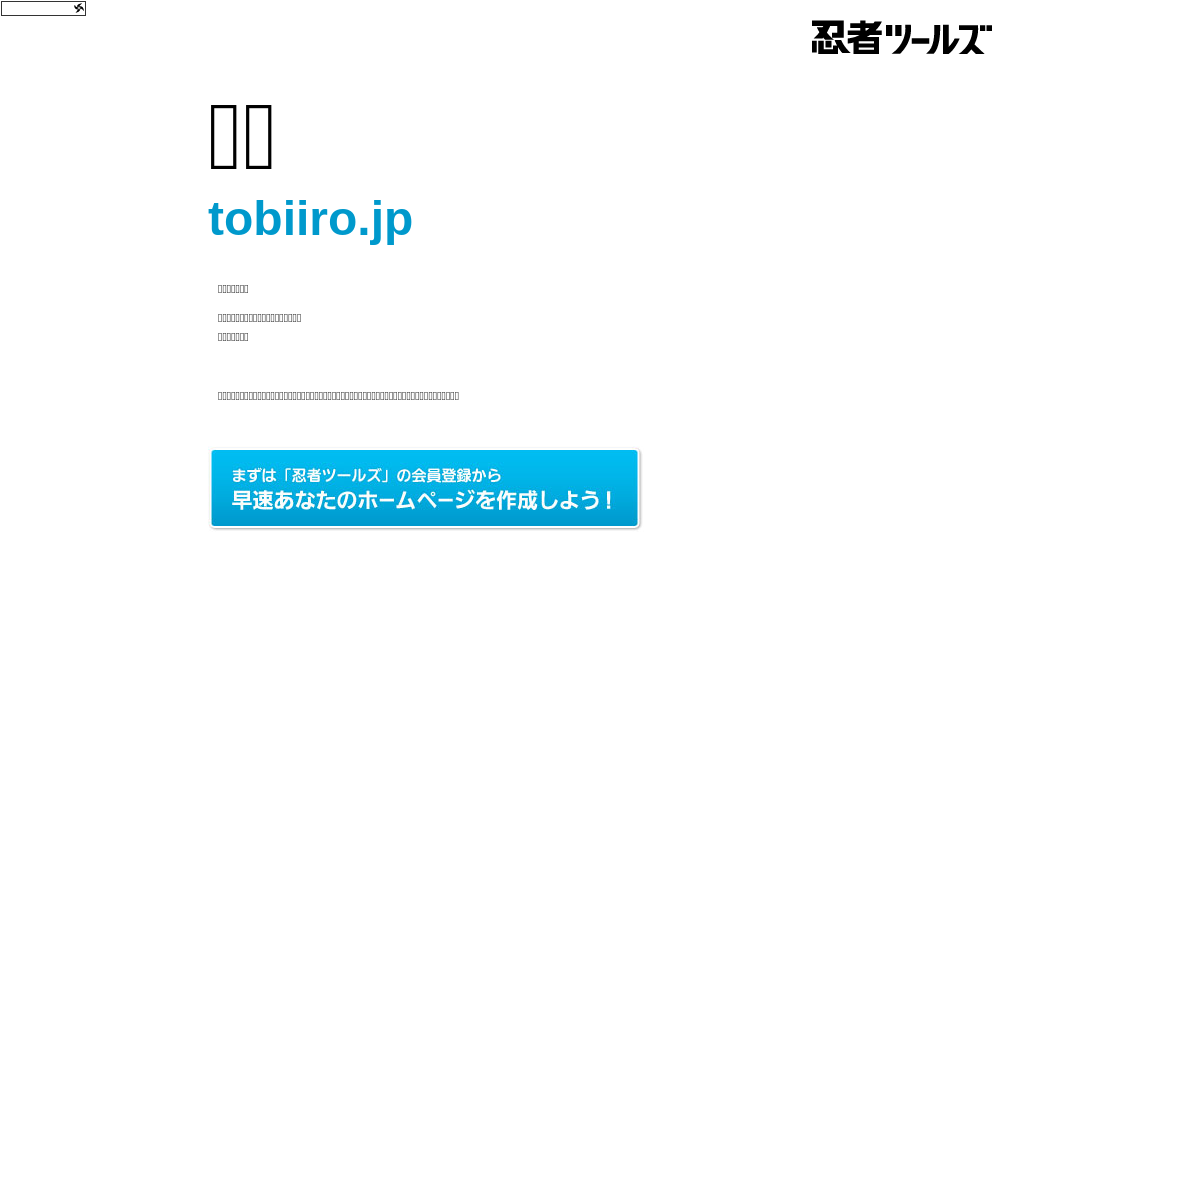 A complete backup of tobiiro.jp